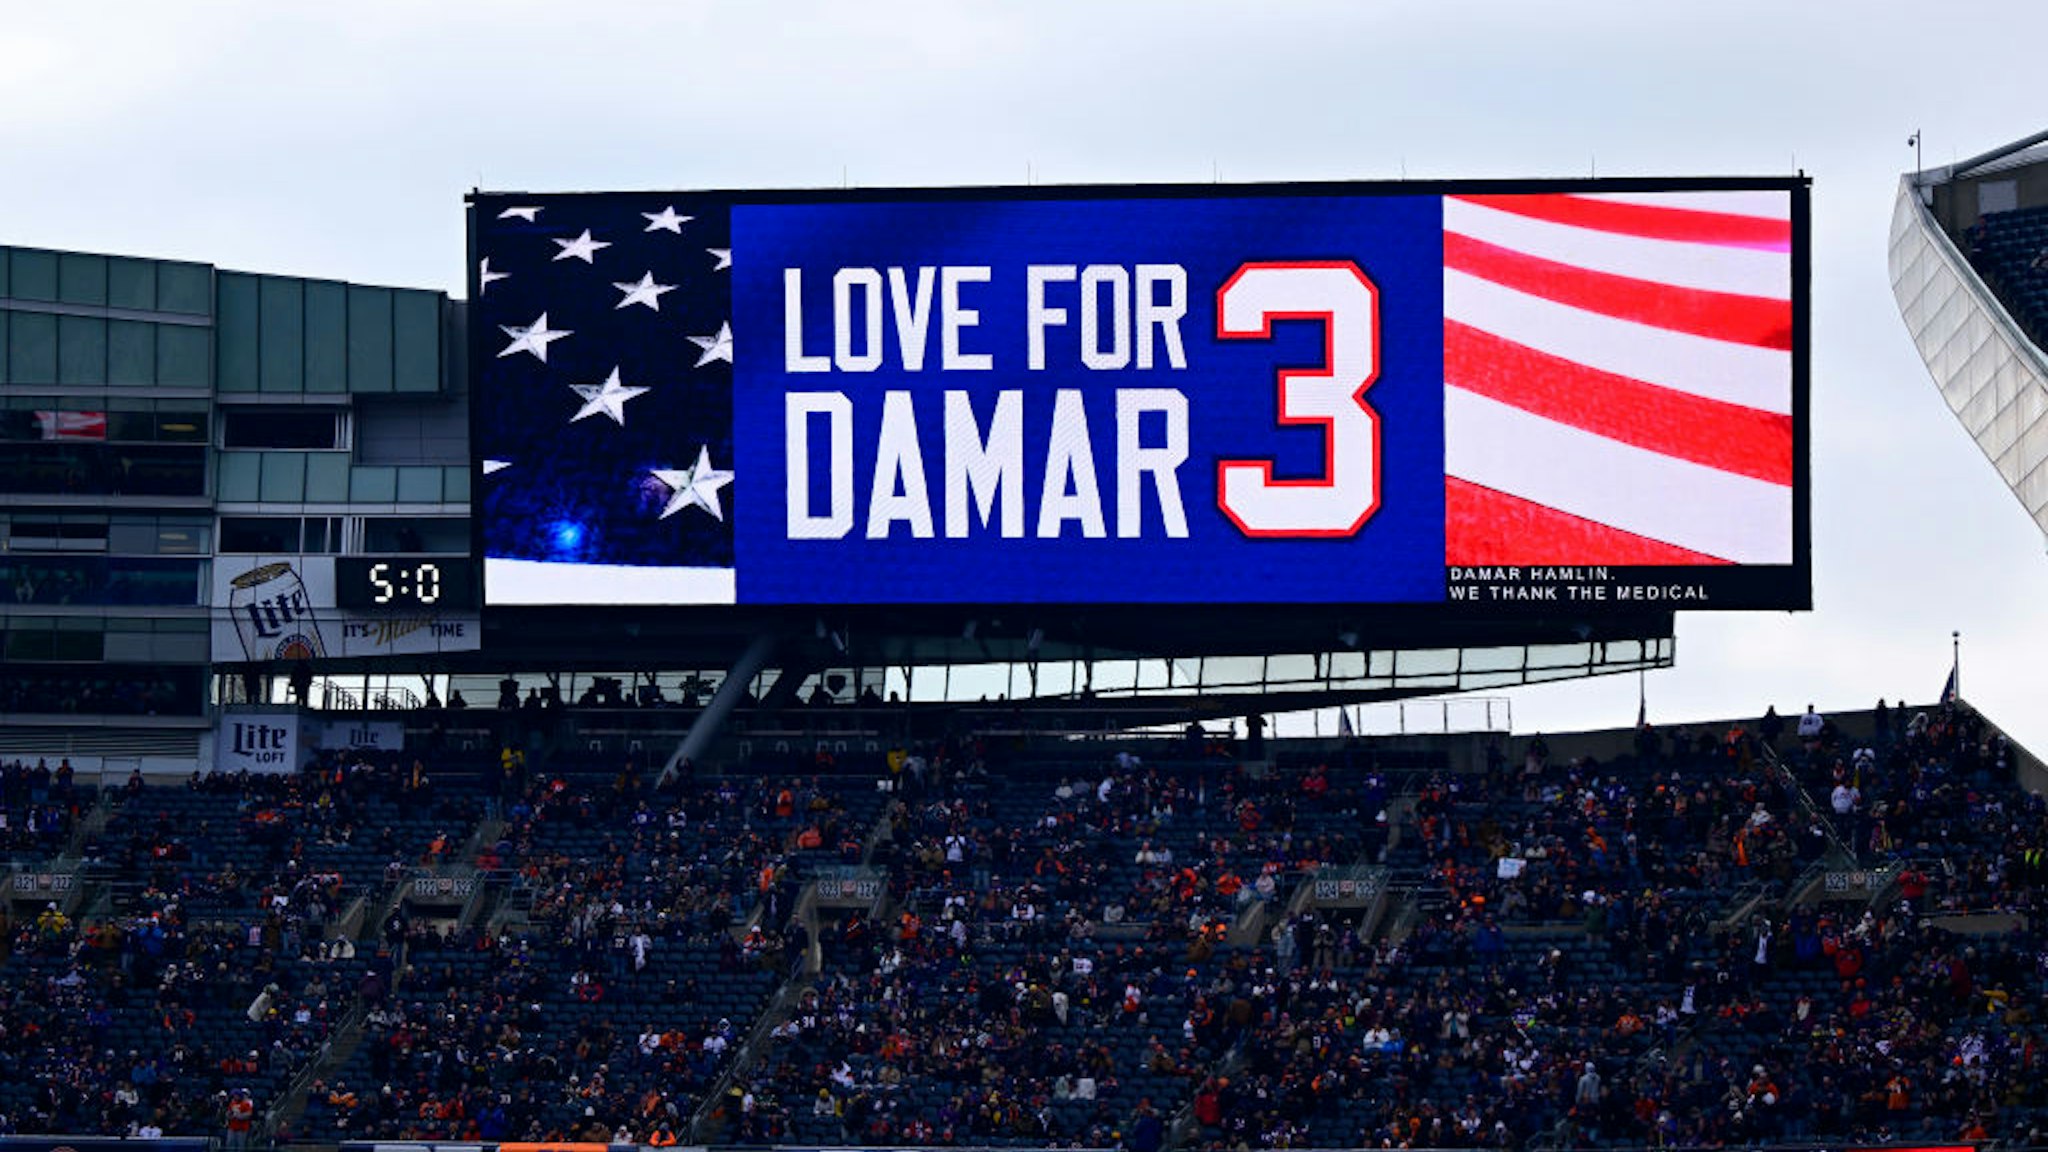 CHICAGO, ILLINOIS - JANUARY 08: Signage is displayed in support of Buffalo Bills safety Damar Hamlin during the game between the Minnesota Vikings and Chicago Bears at Soldier Field on January 08, 2023 in Chicago, Illinois. (Photo by Quinn Harris/Getty Images)